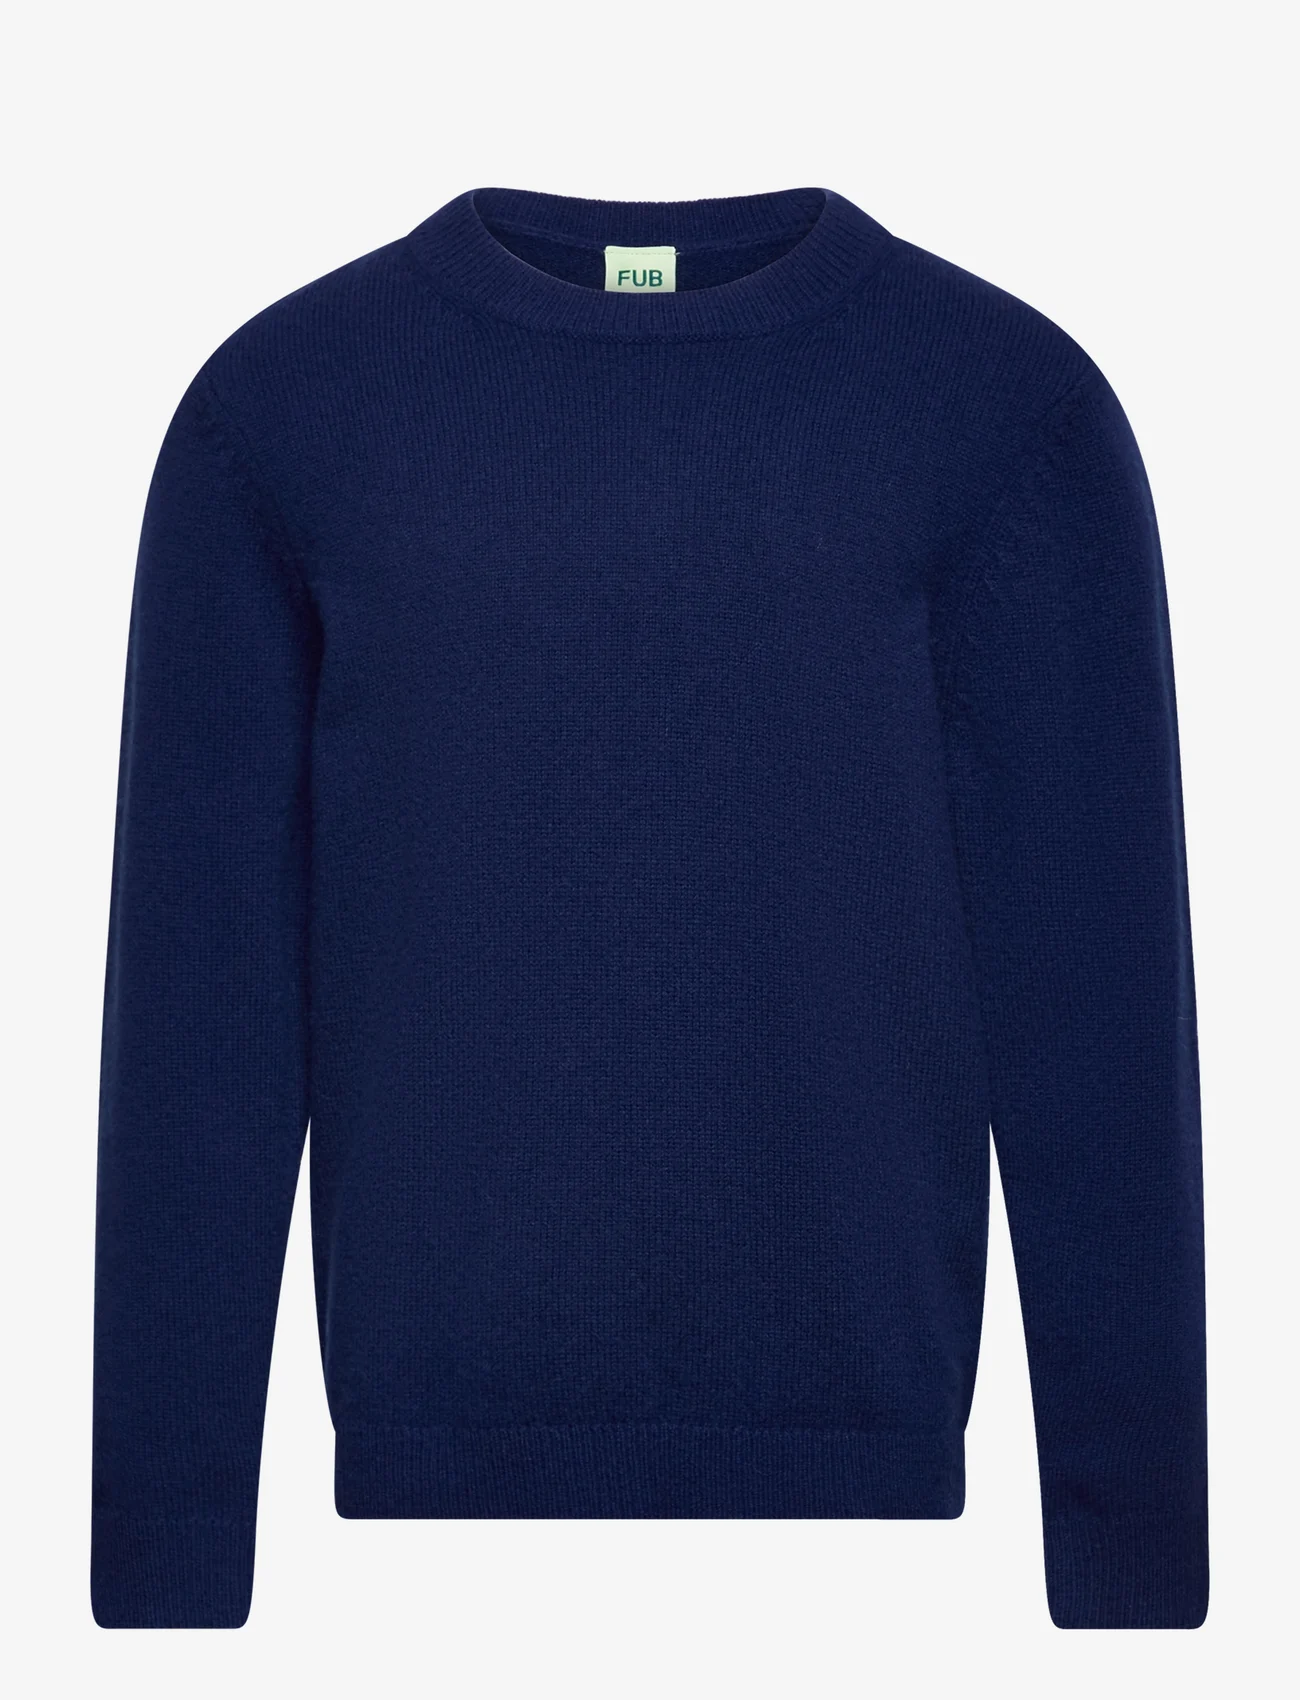 FUB - Lambswool Crew - pullover - royal blue - 0